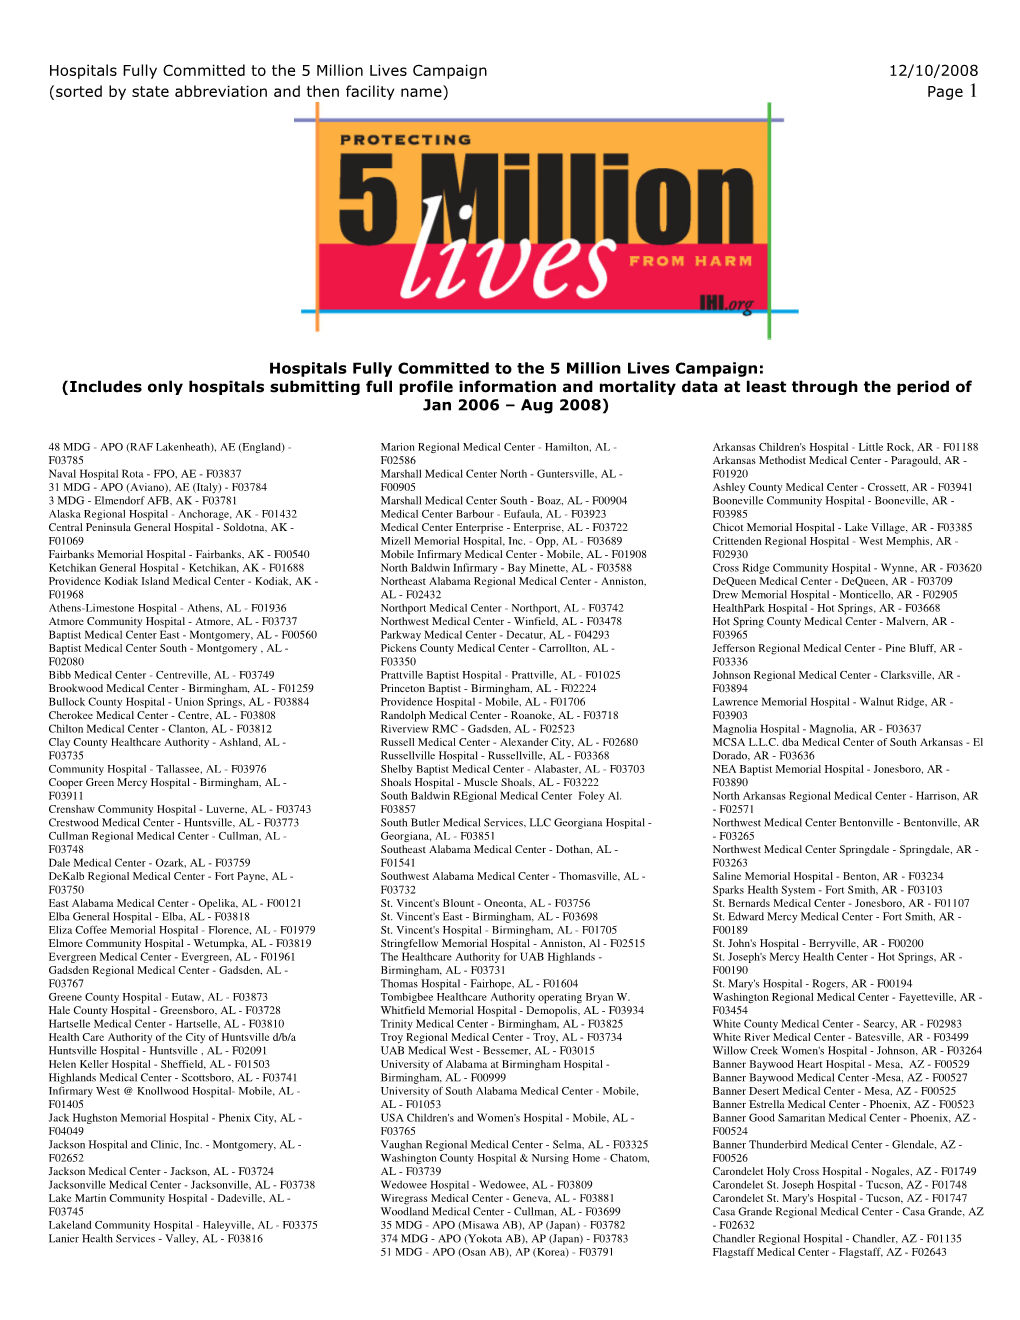 Hospitals Fully Committed to the 5 Million Lives Campaign 12/10/2008 (Sorted by State Abbreviation and Then Facility Name) Page 1